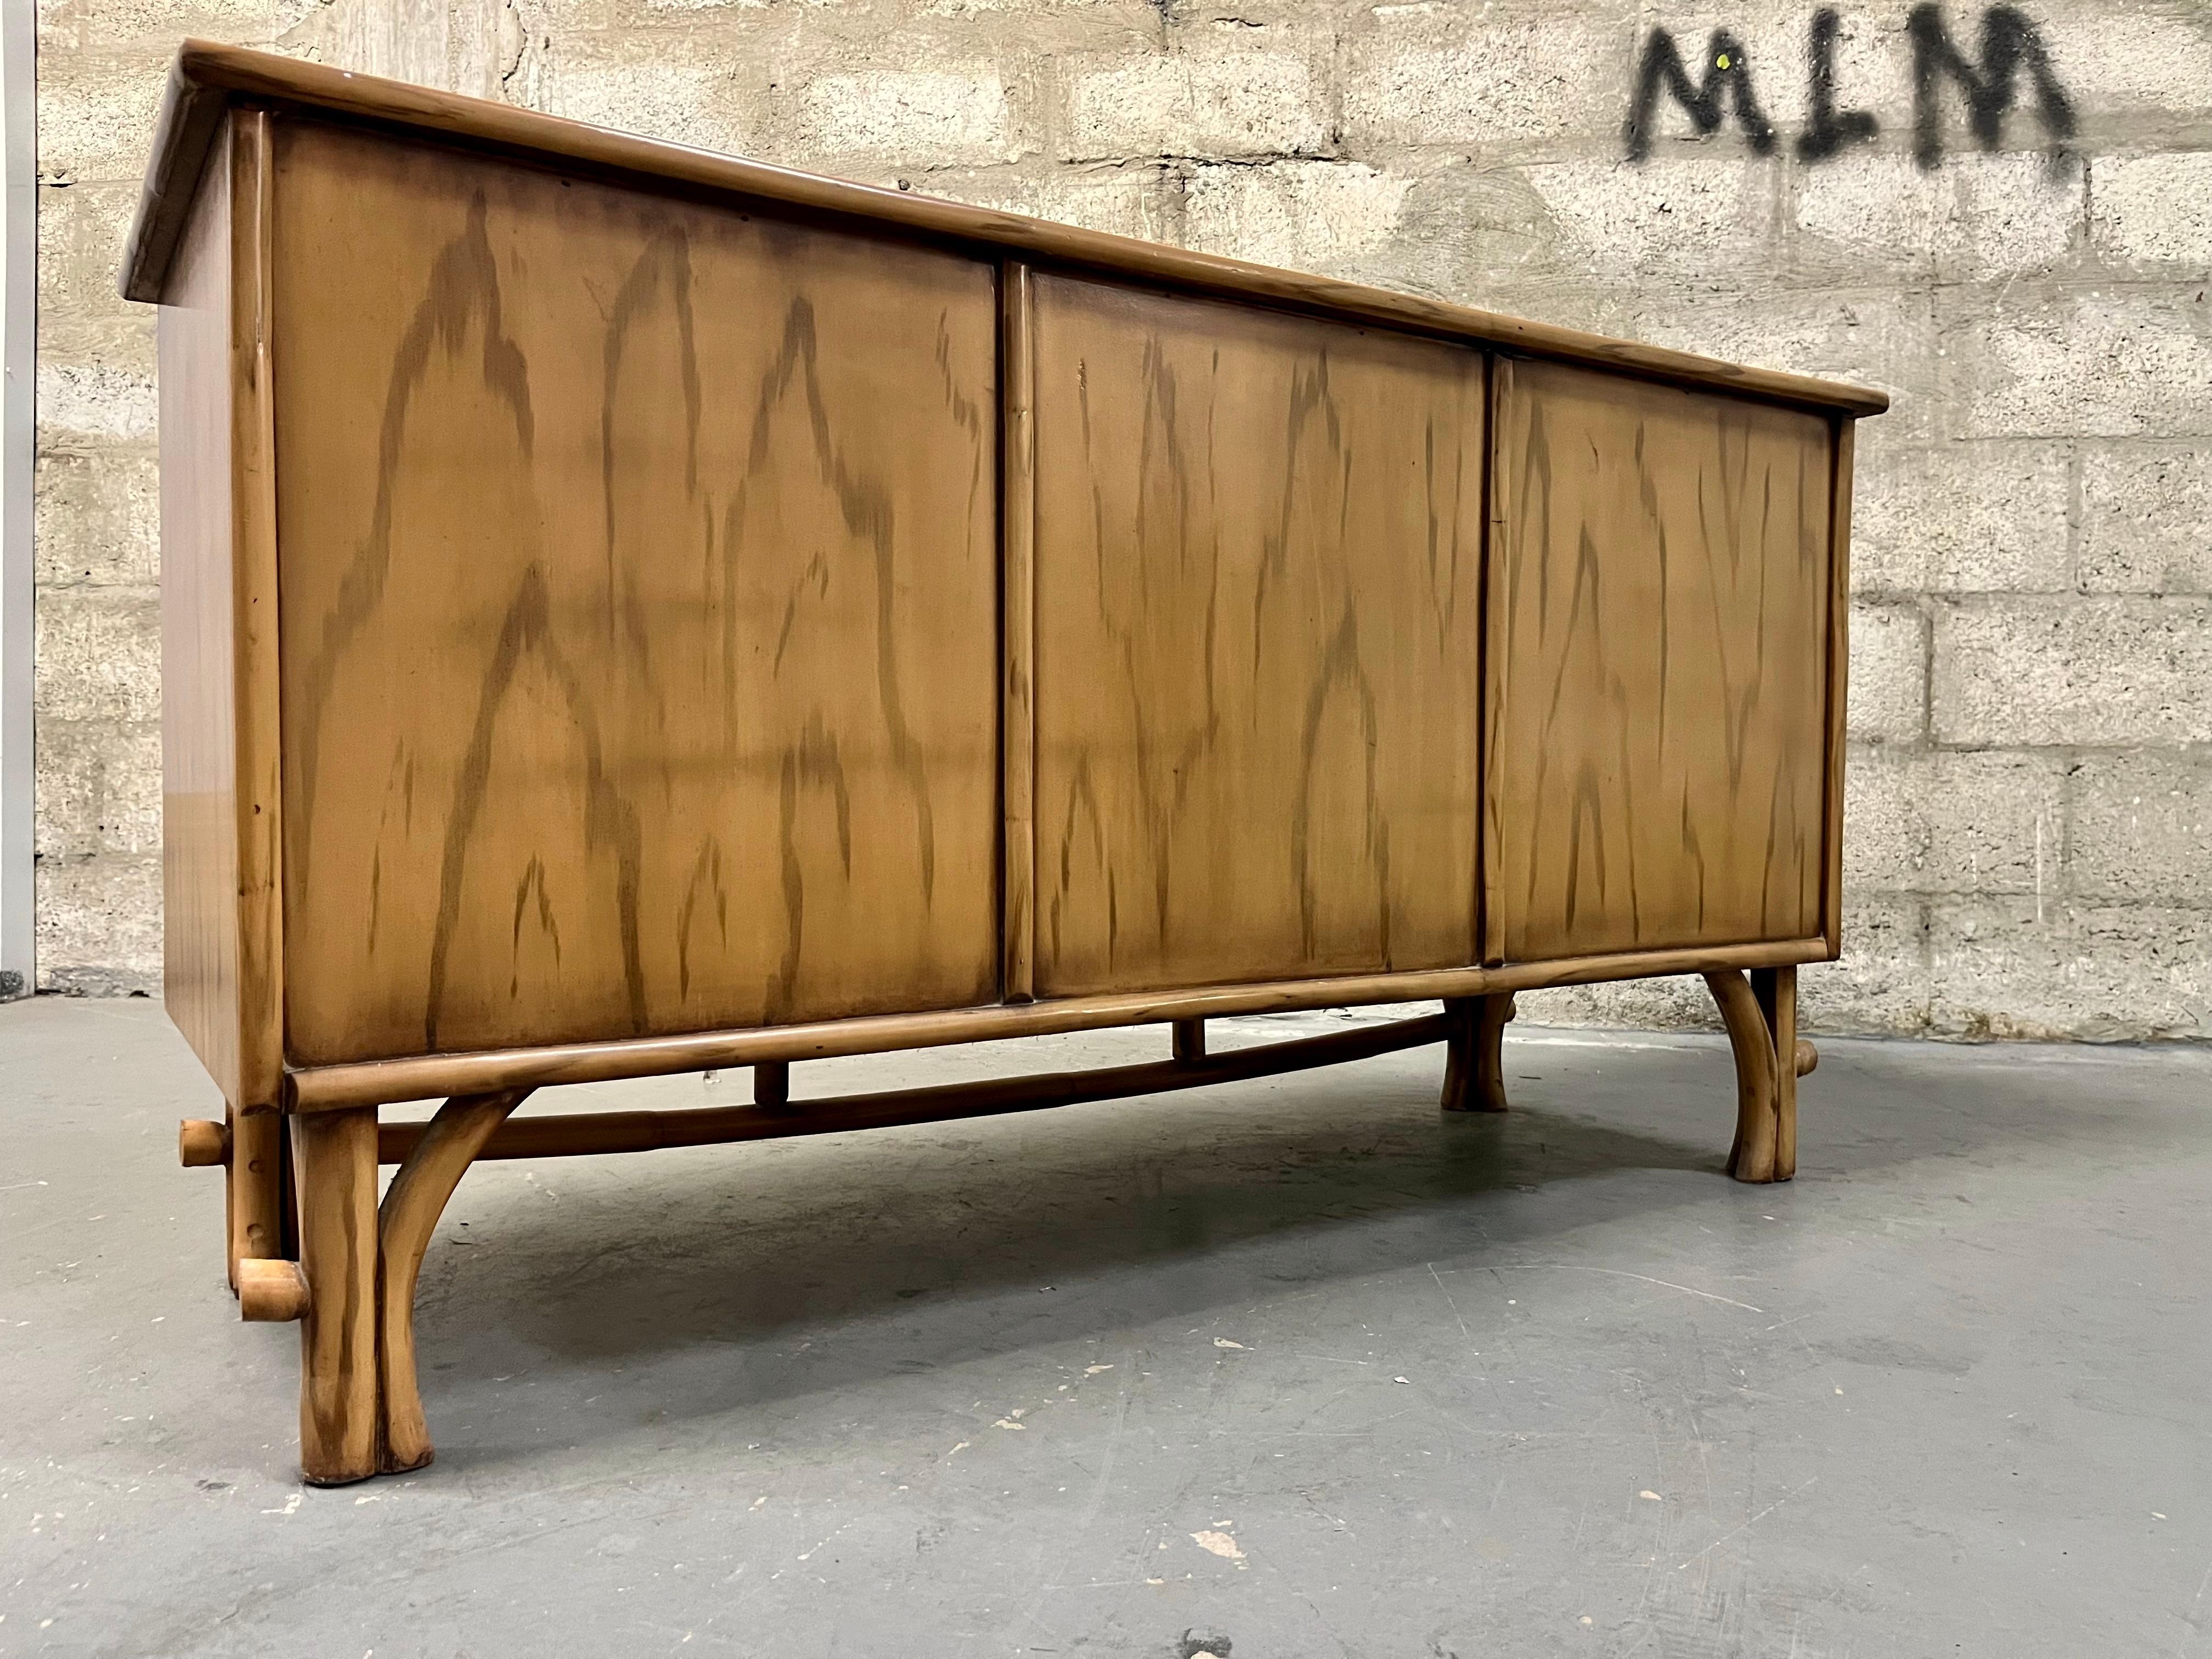 1960s Chinoiserie Inspired Sideboard in the Adrien Audoux & Frida Minet Style For Sale 5